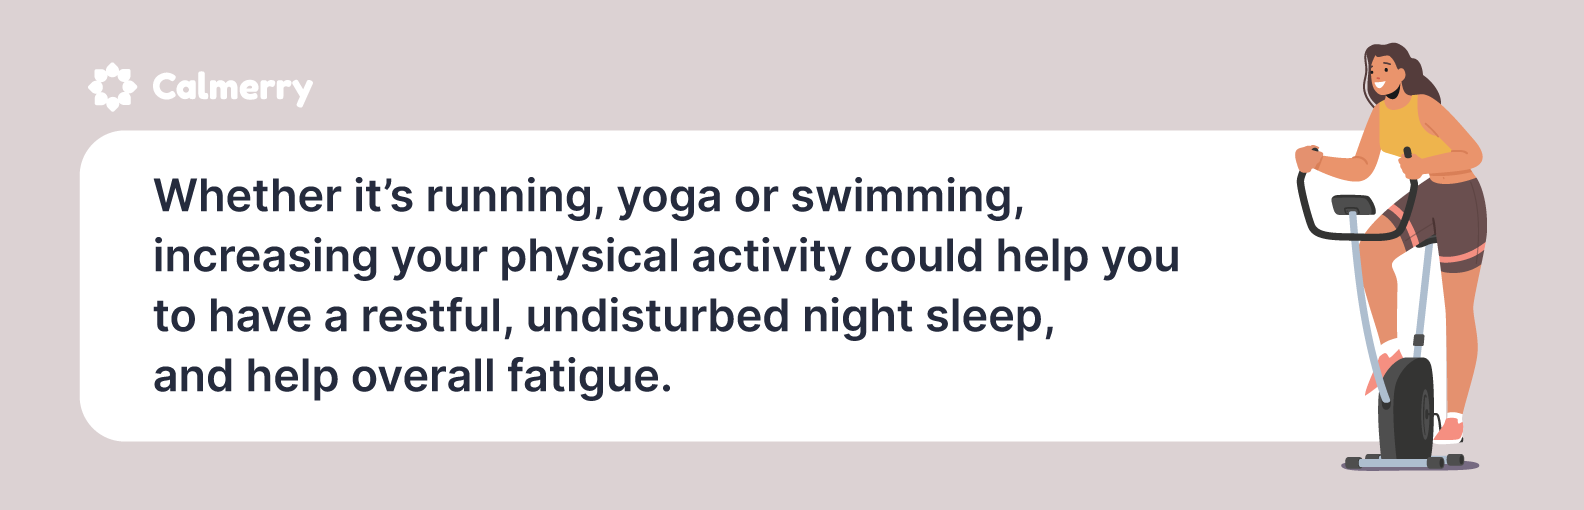 increasing your physical activity could help you to have a restful